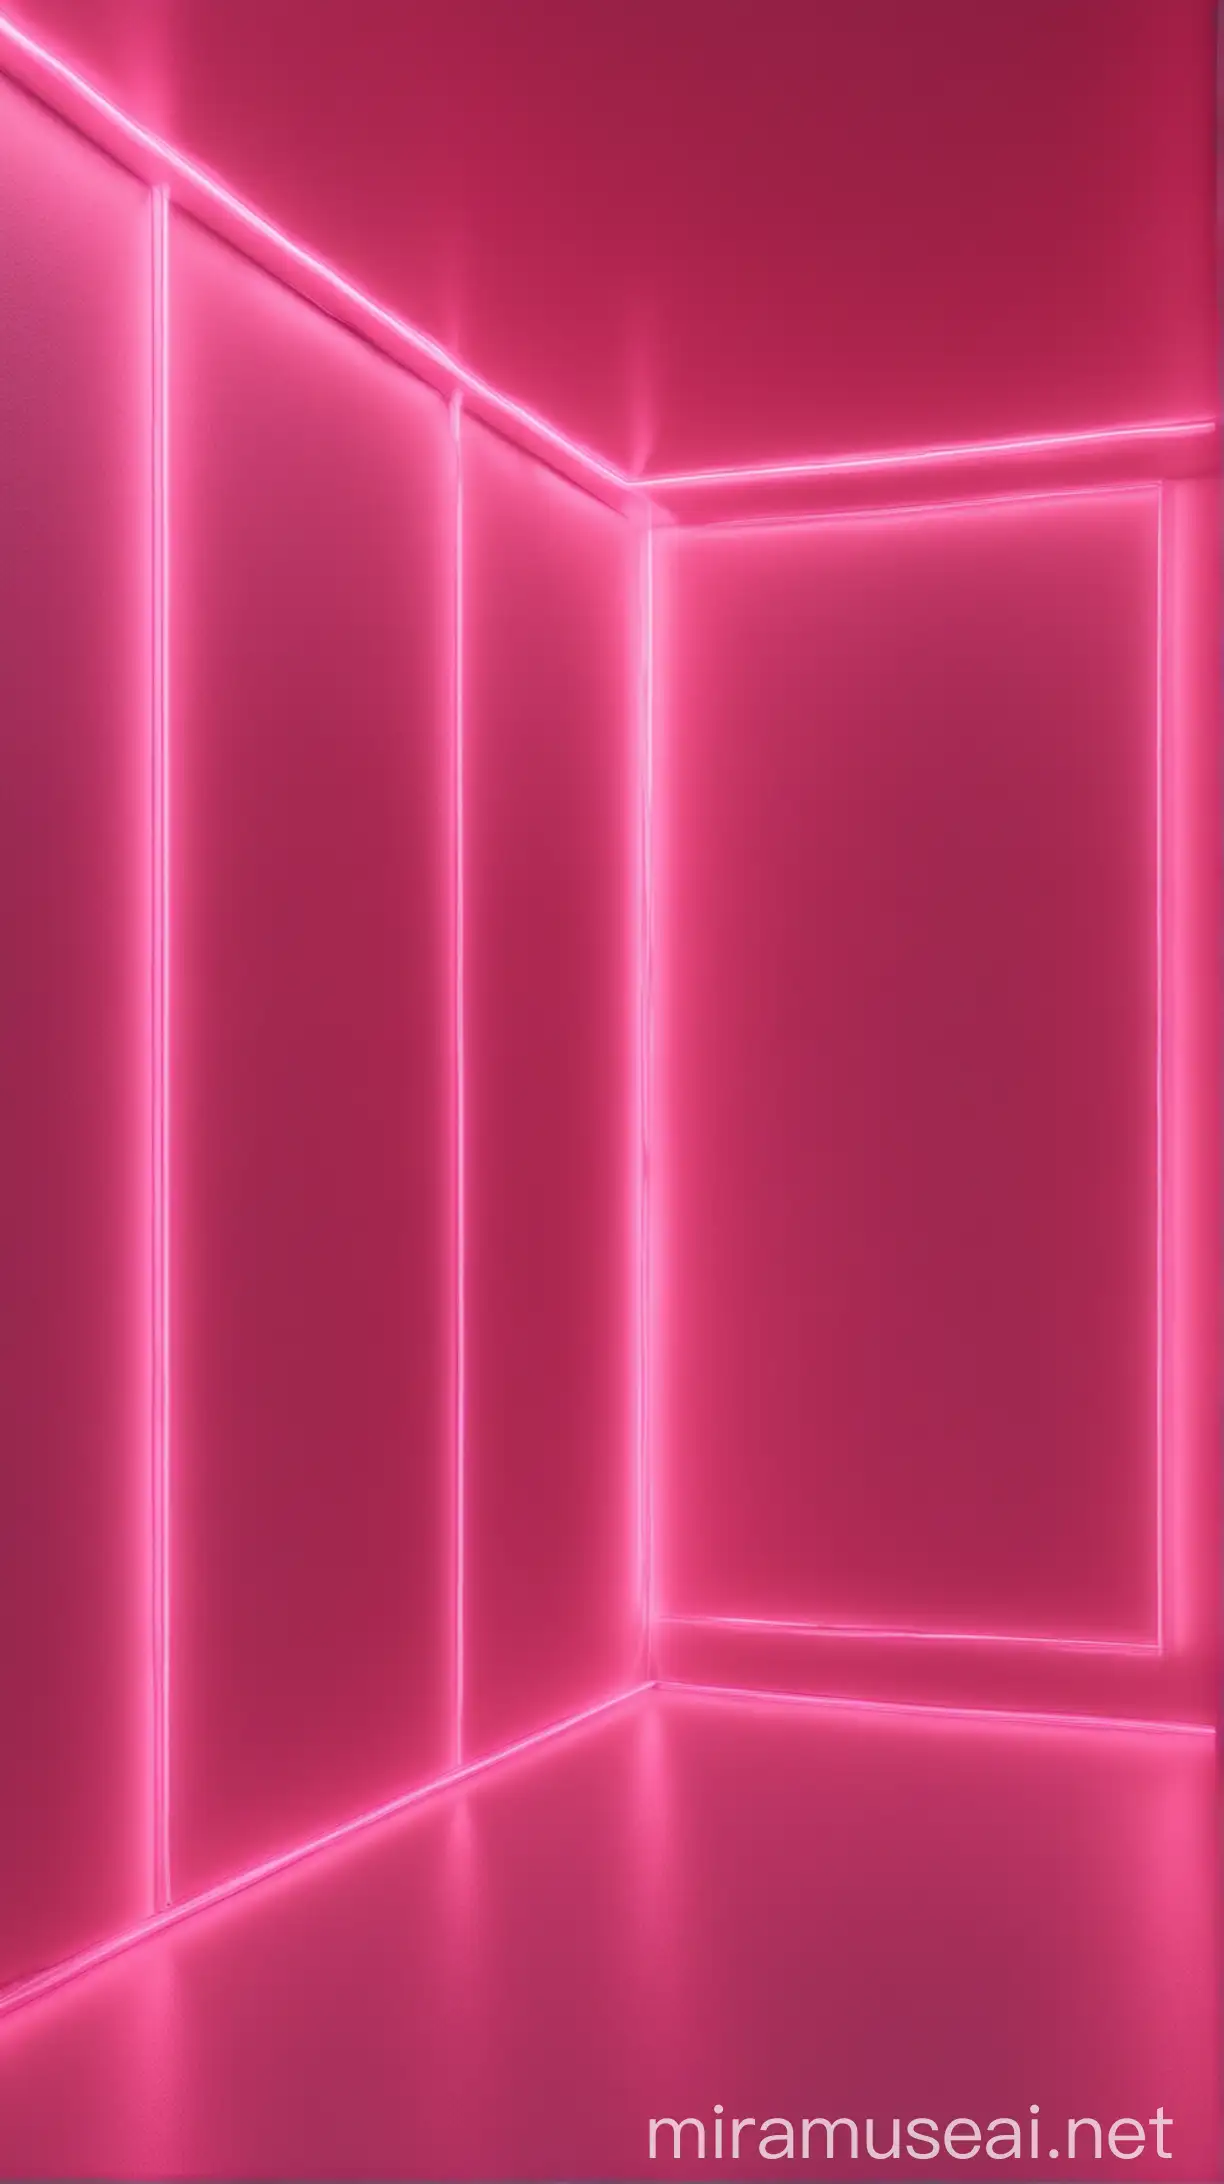 3D Render of a Room with Glowing Hot Pink Neon Lines Abstract Background